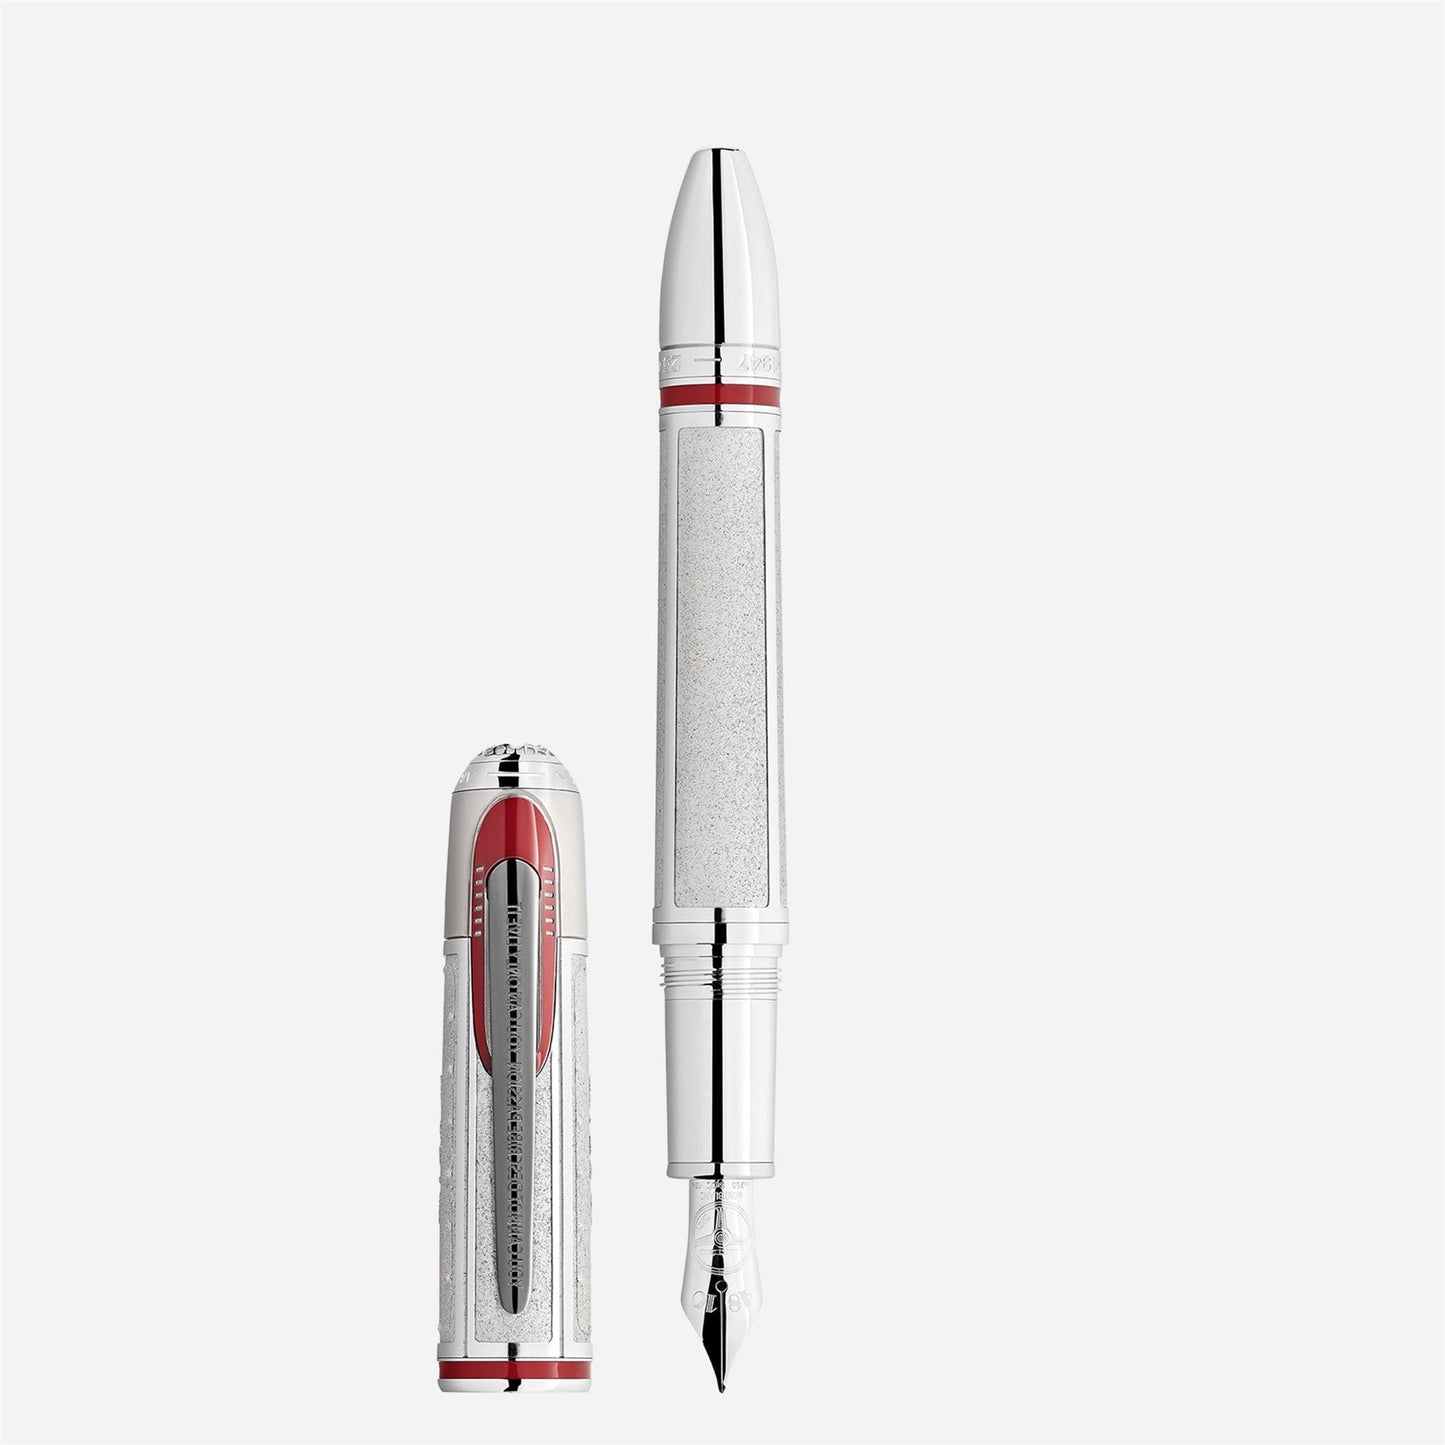 Montblanc Great Characters Enzo Ferrari Limited Edition 1898 Fountain Pen - Medium